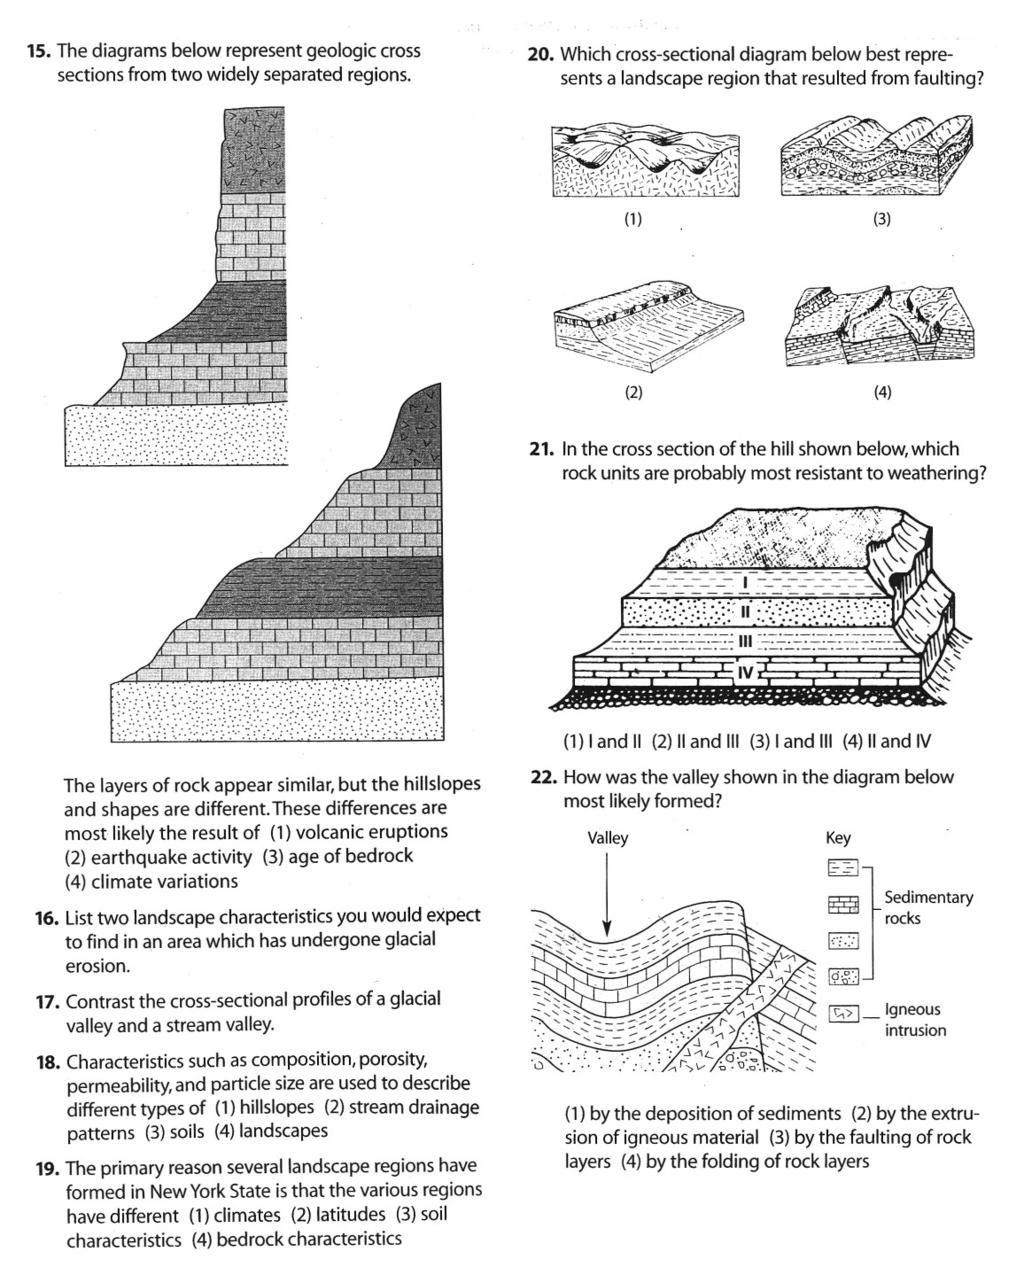 15. The diagrams below represent geologic cross sections from two widely separated regions. 20. Which cross-sectional diagram below best represents a landscape region that resulted from faulting?